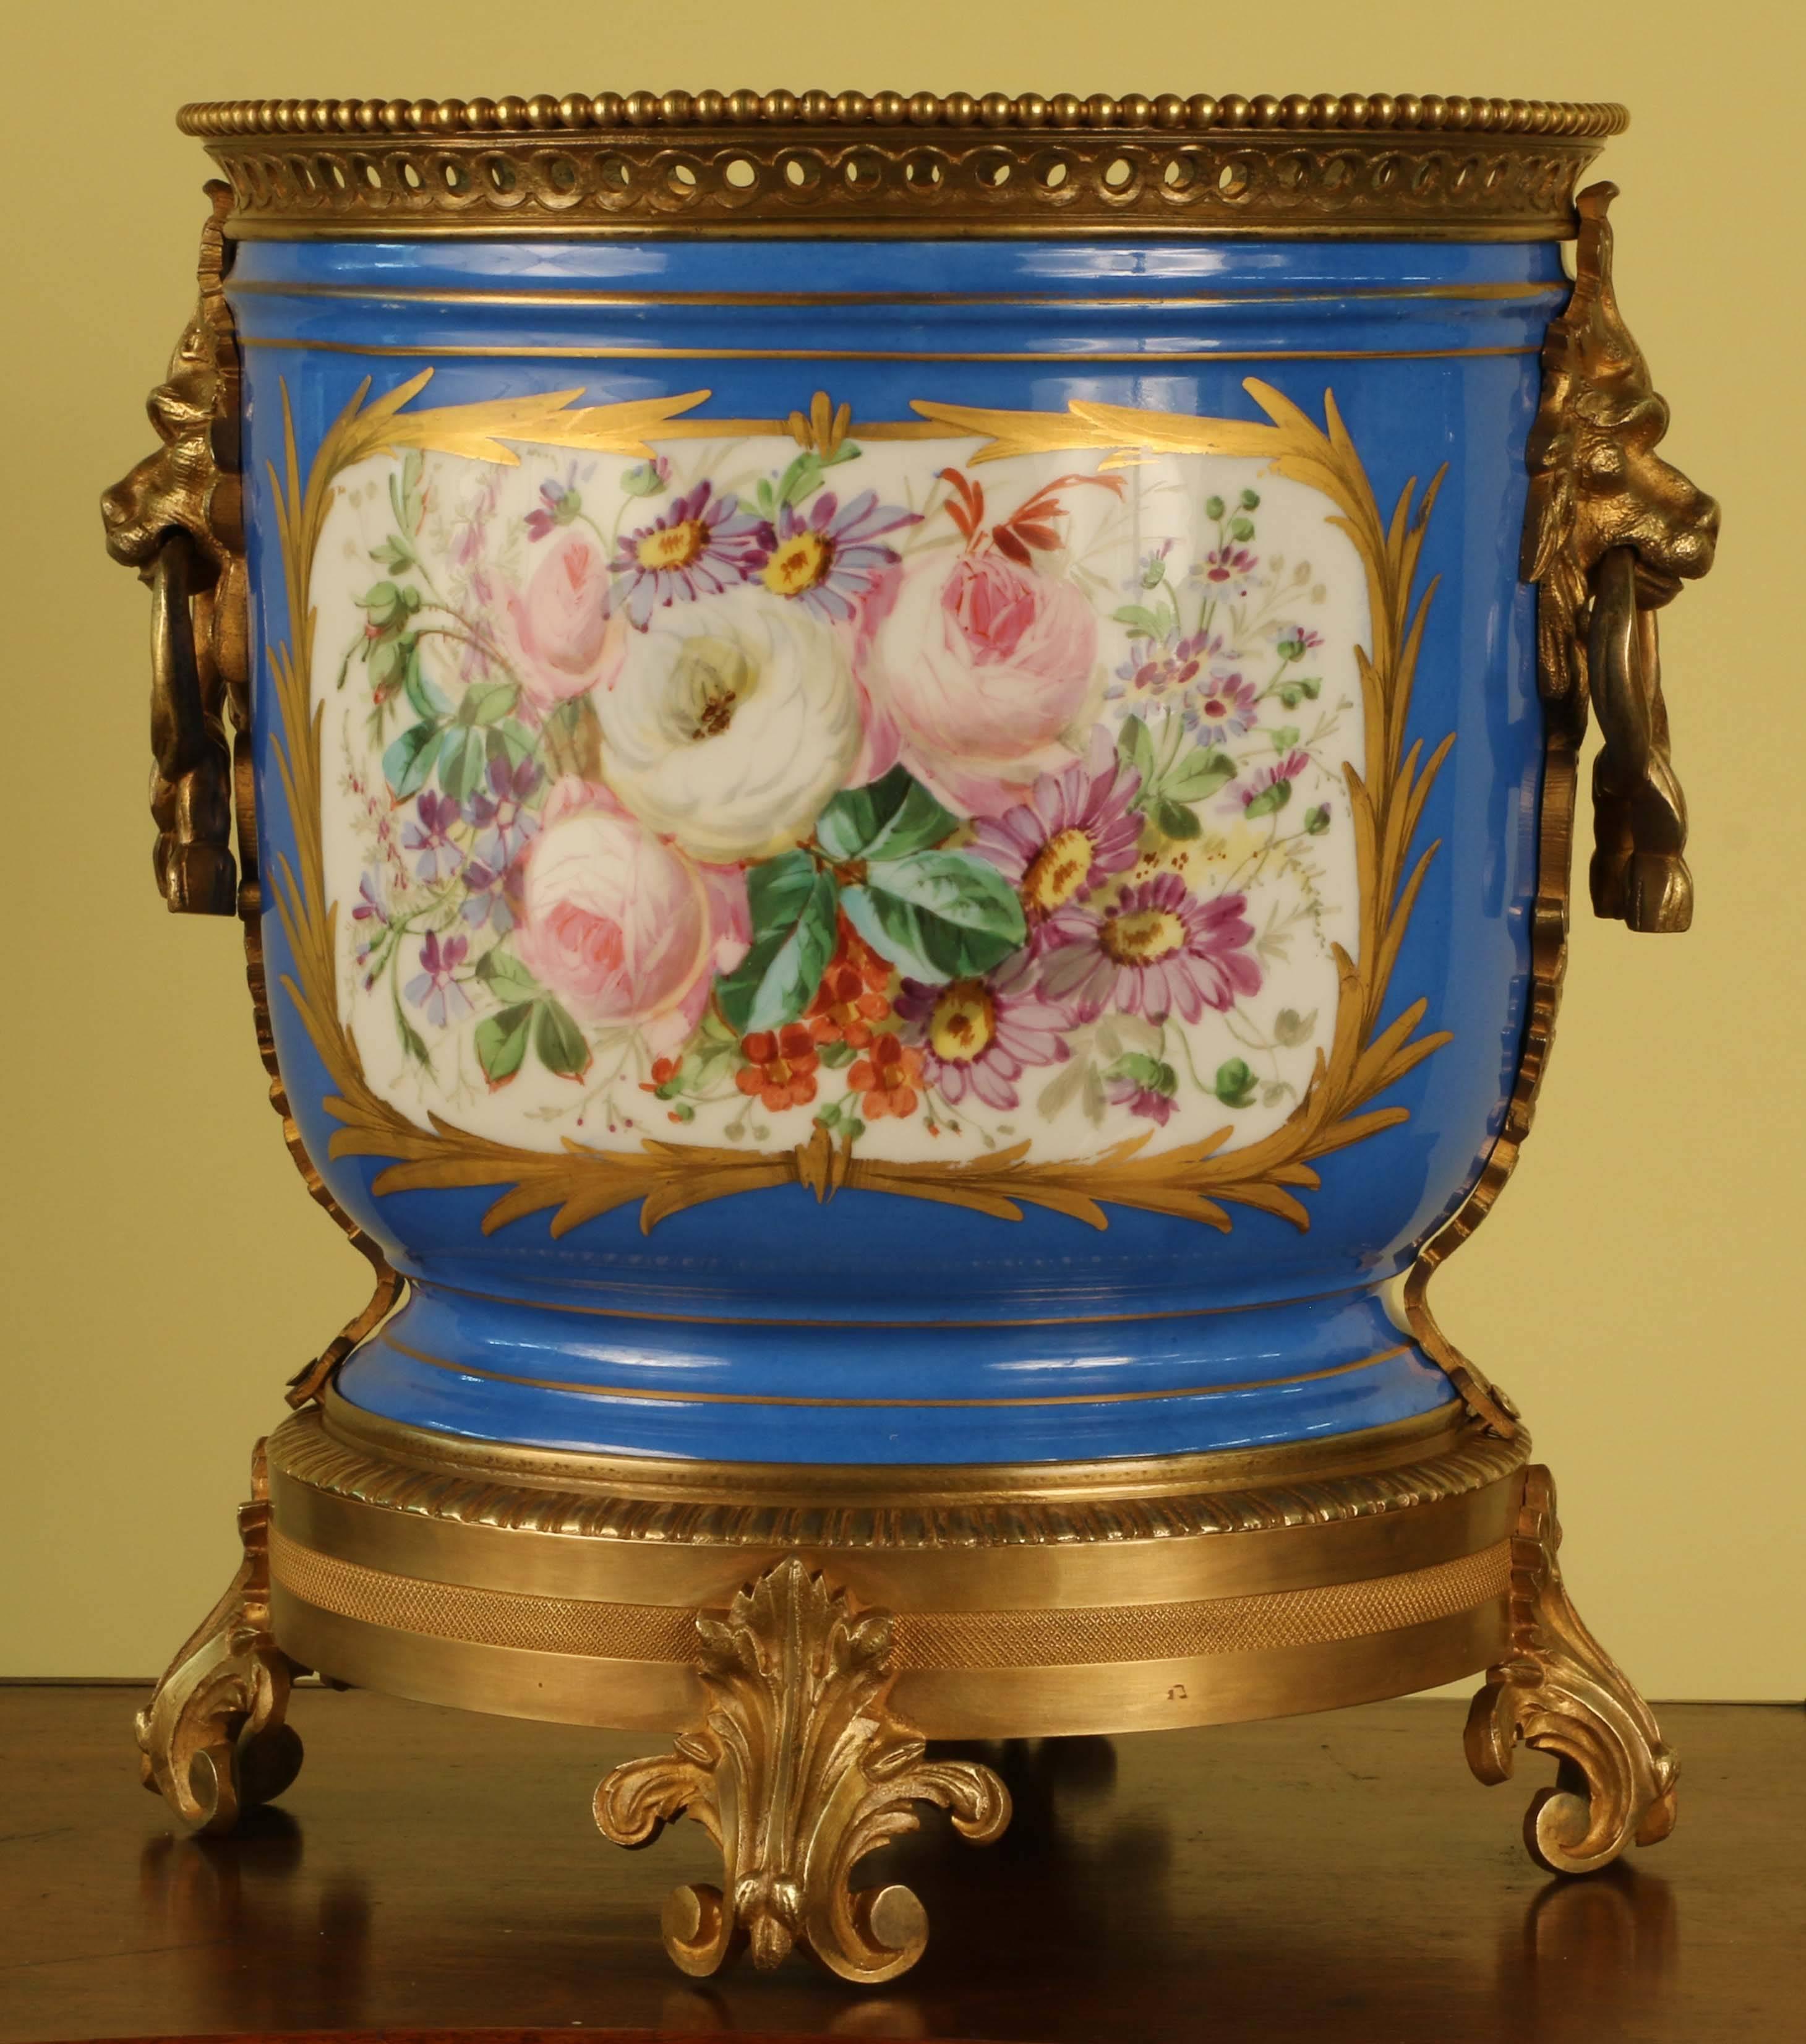 Cylindrical form with two painted reserves, one a floral bouguet, the other, figures in 18th century dress in a landscape, both with gilt scroll borders, the mounts composed of lion masks to the sides, bead edge around the pierced rim, and